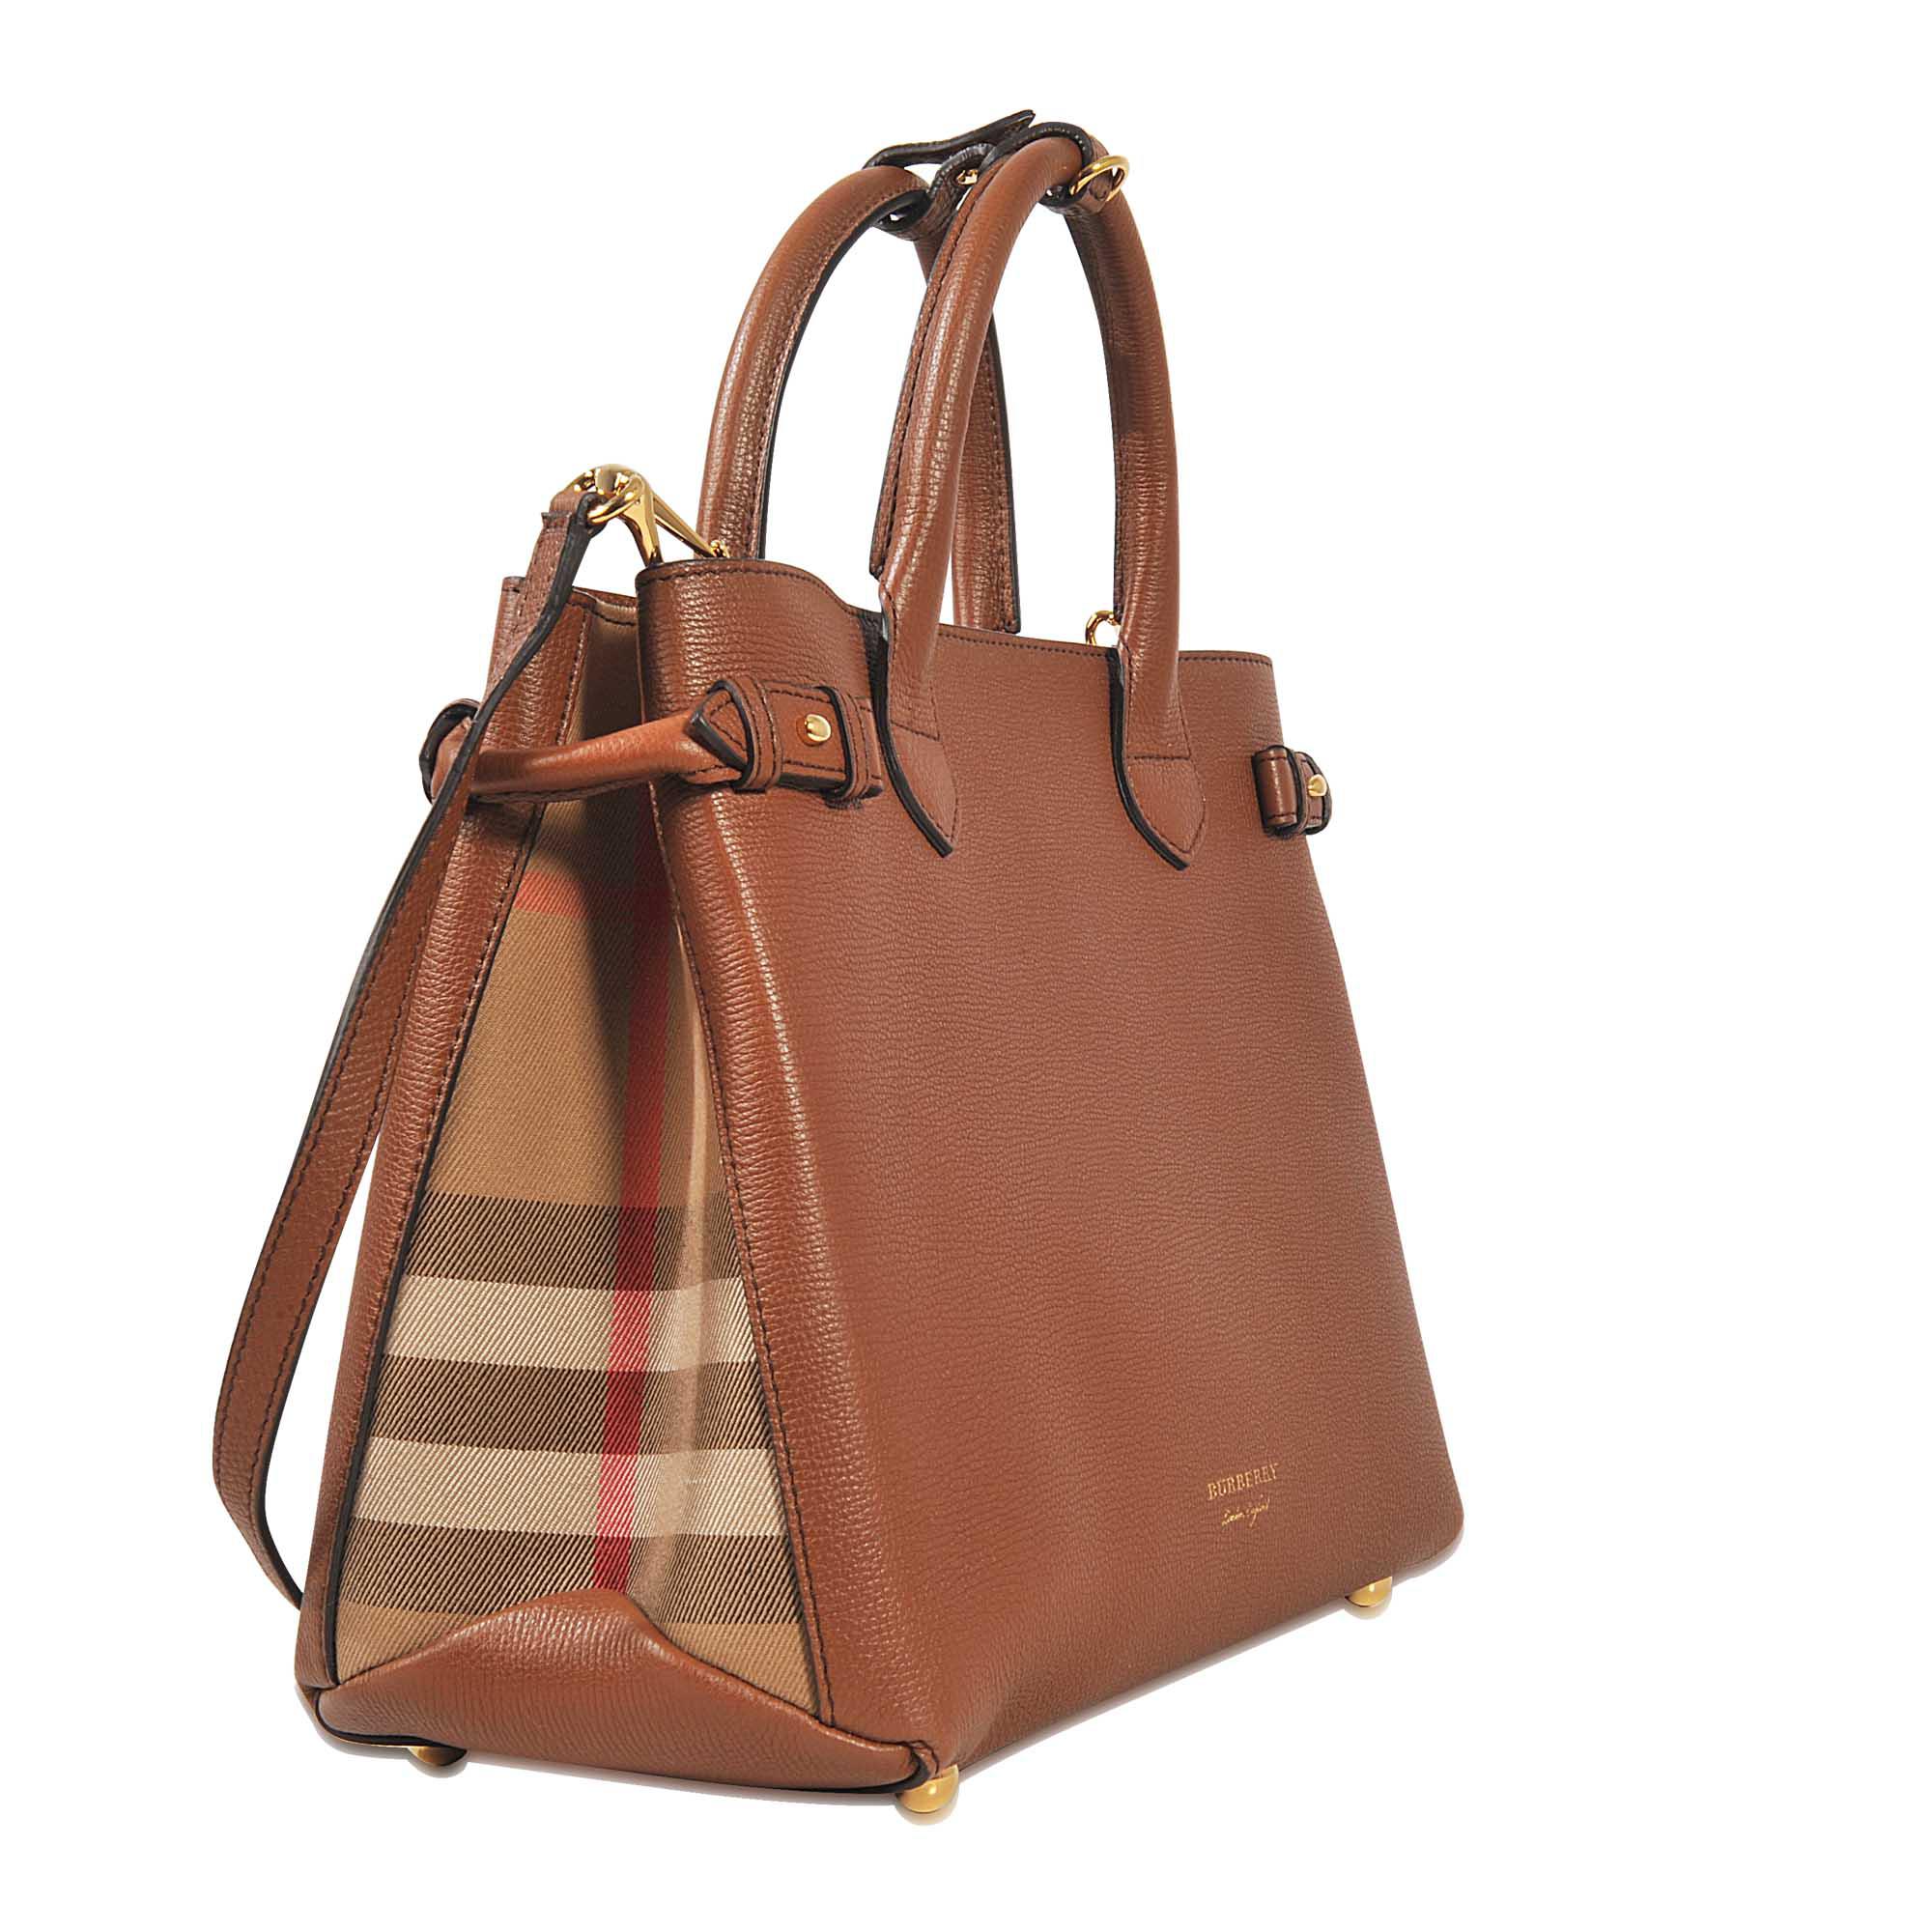 Burberry Leather Medium Banner Bag in Brown - Lyst